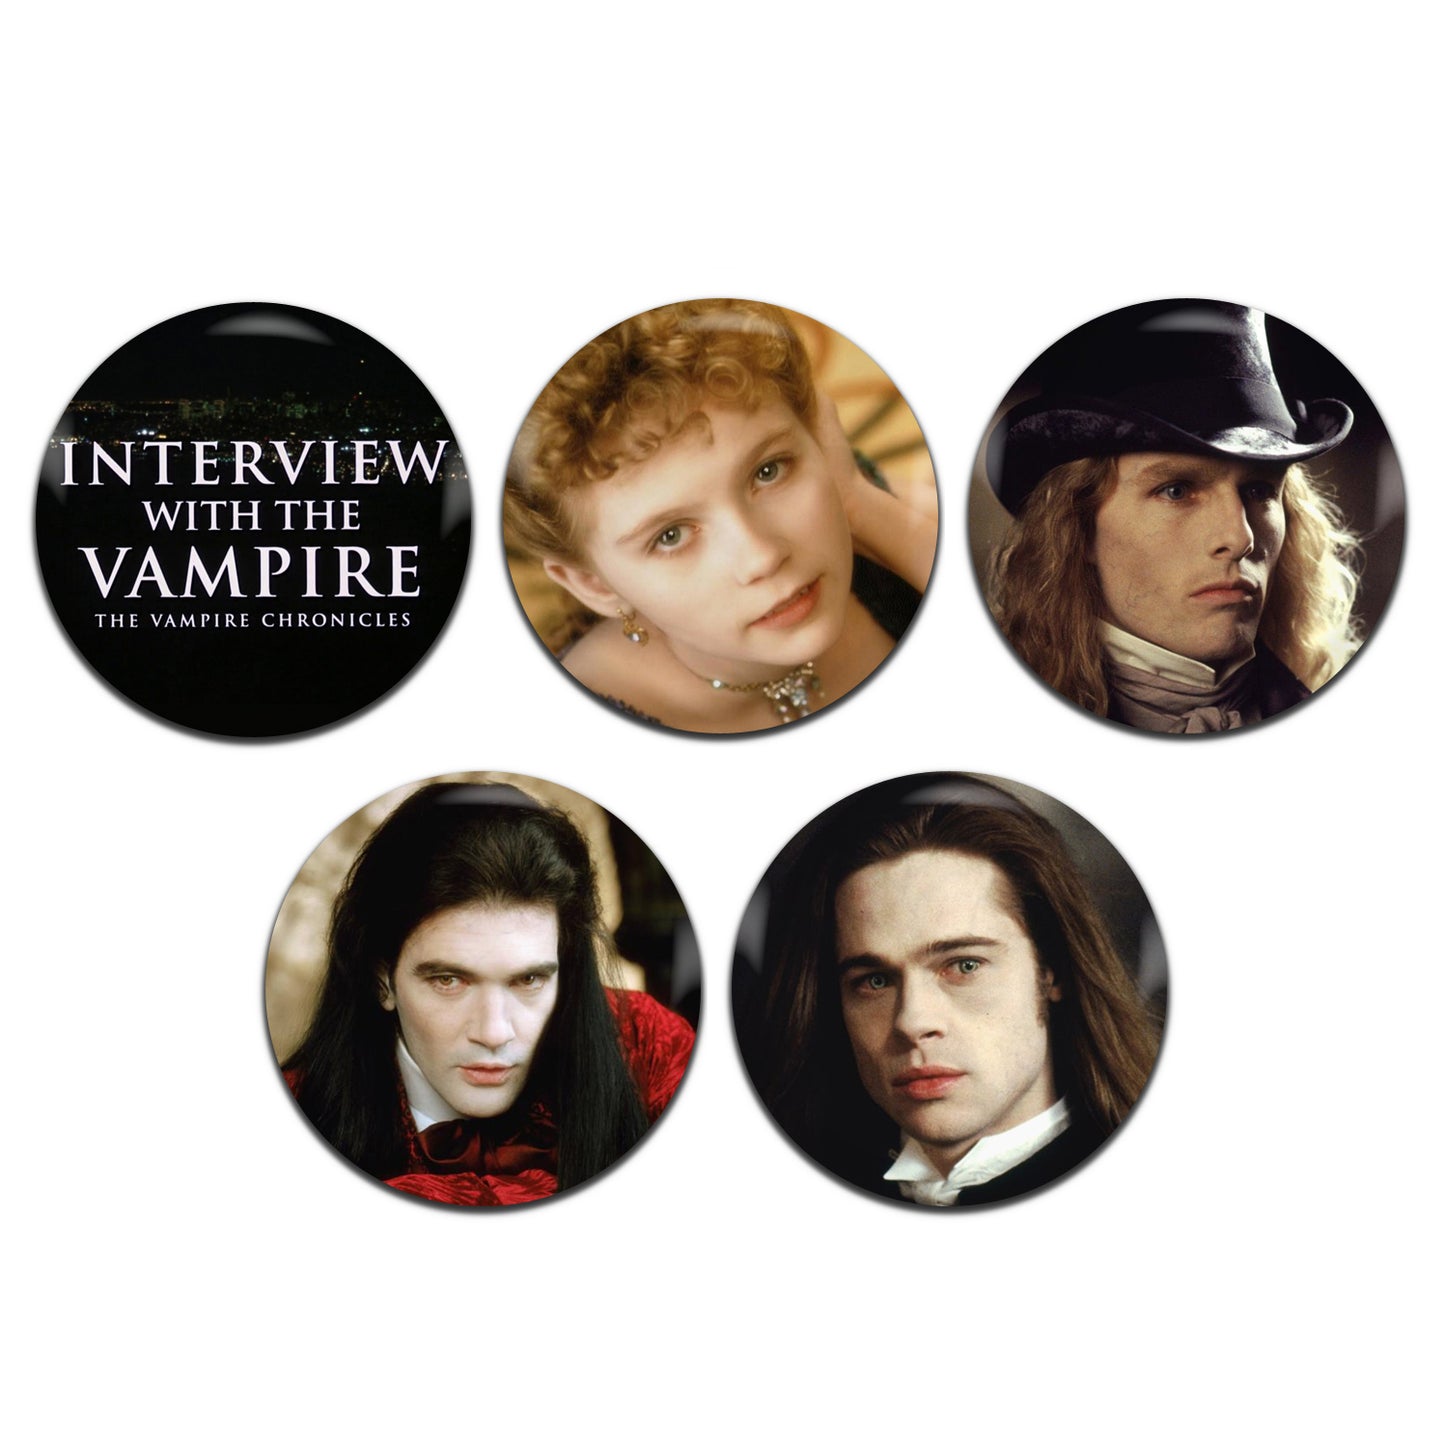 Interview With The Vampire Movie Gothic Horror Film 90's 25mm / 1 Inch D-Pin Button Badges (5x Set)